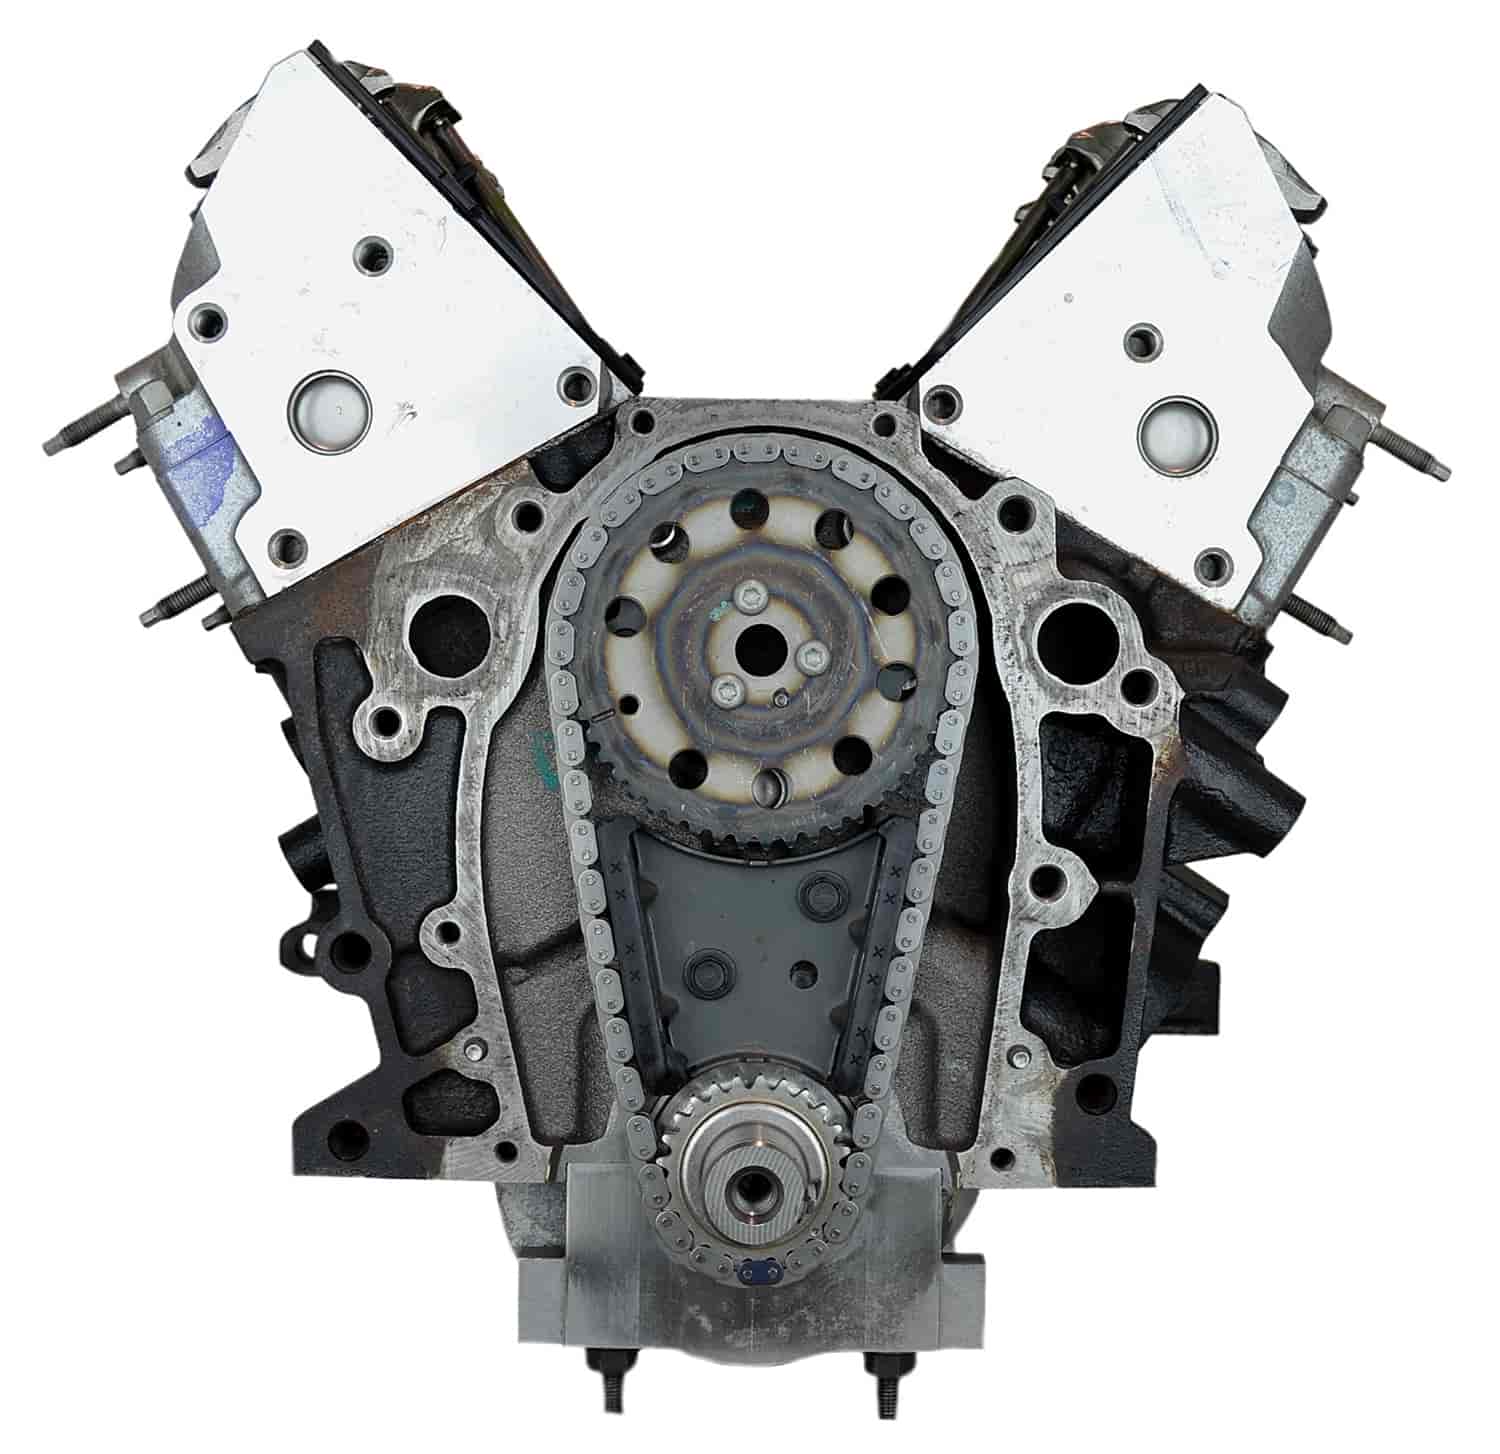 Remanufactured Crate Engine for 2007-2009 Chevy Equinox & Pontiac Torrent with 3.4L V6